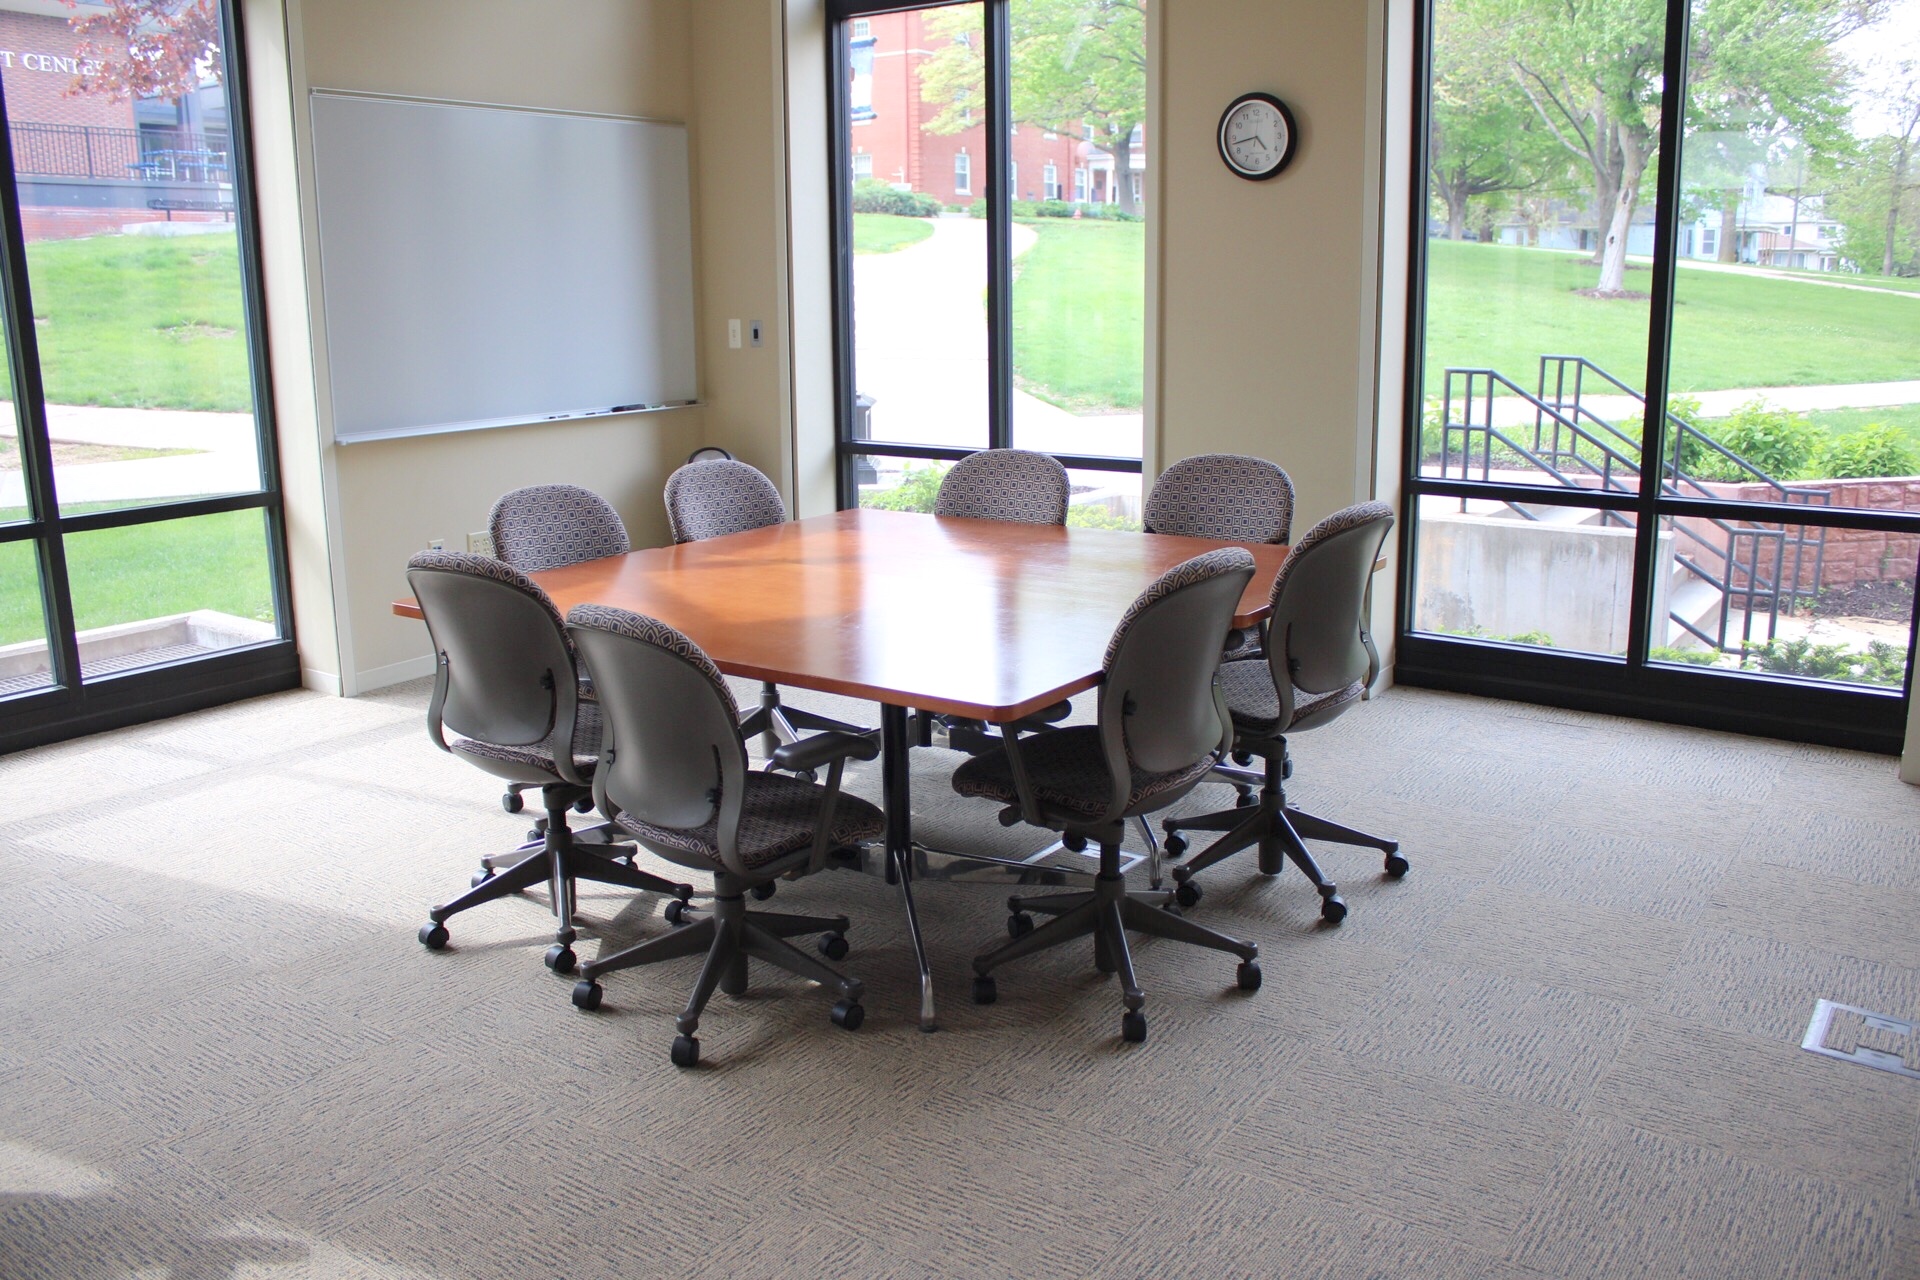 North end of the CATS conference room showing tables and chairs and a whiteboard.